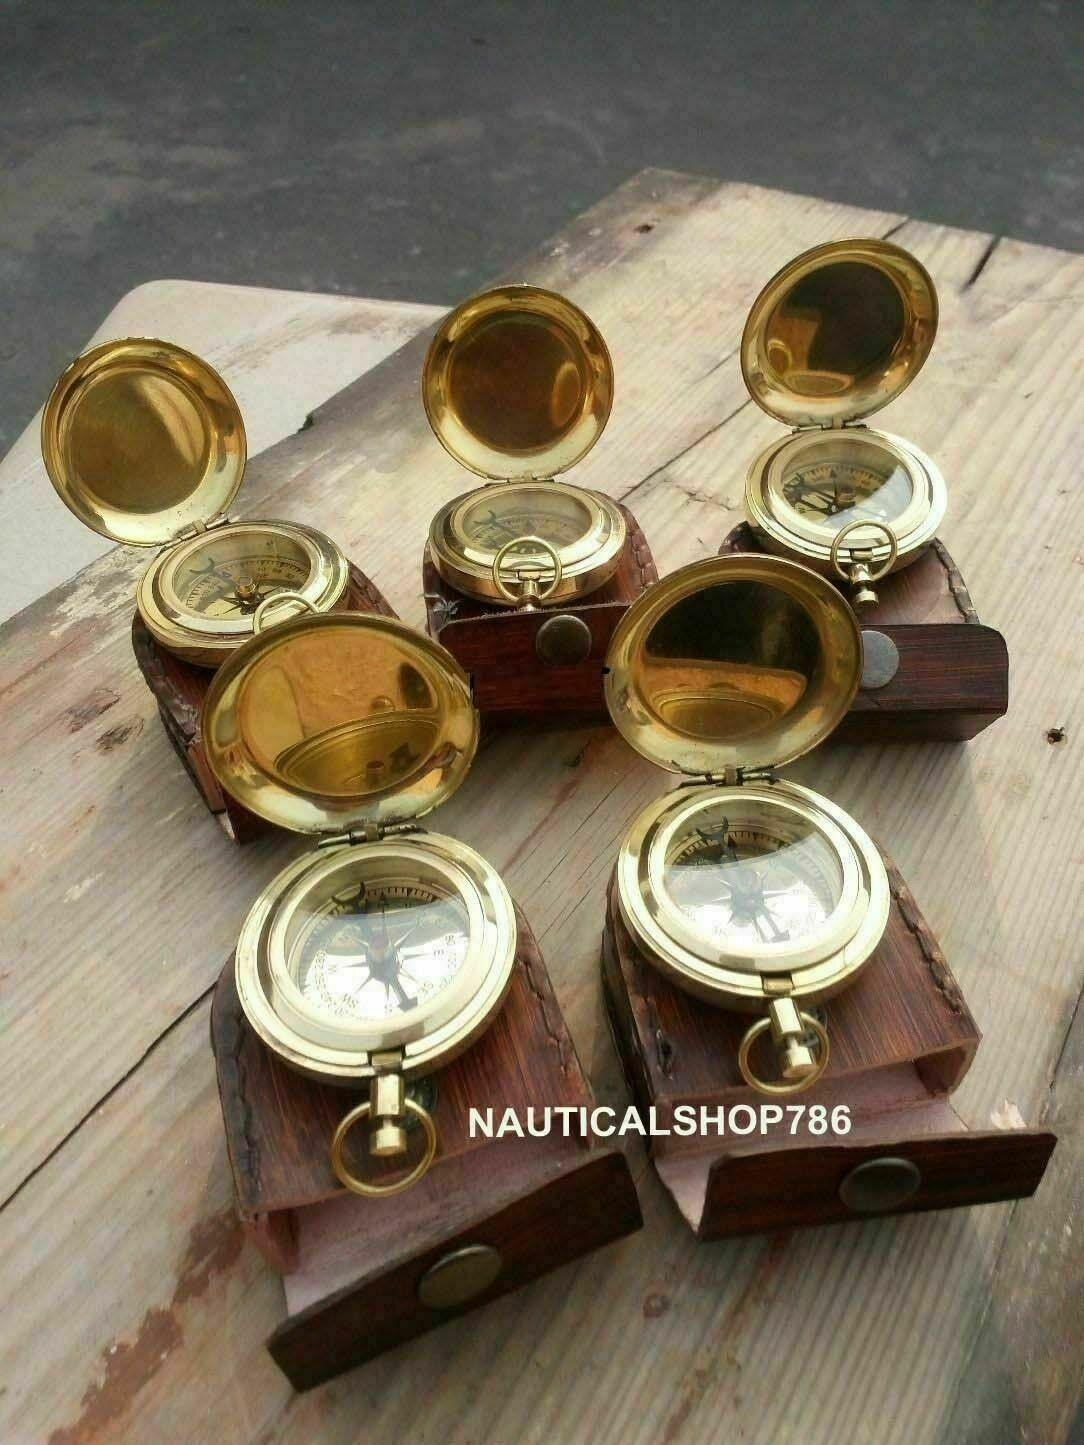 Maritime Push Button Compass Nautical Vintage Brass Compass With Case Set of 5 Без бренда